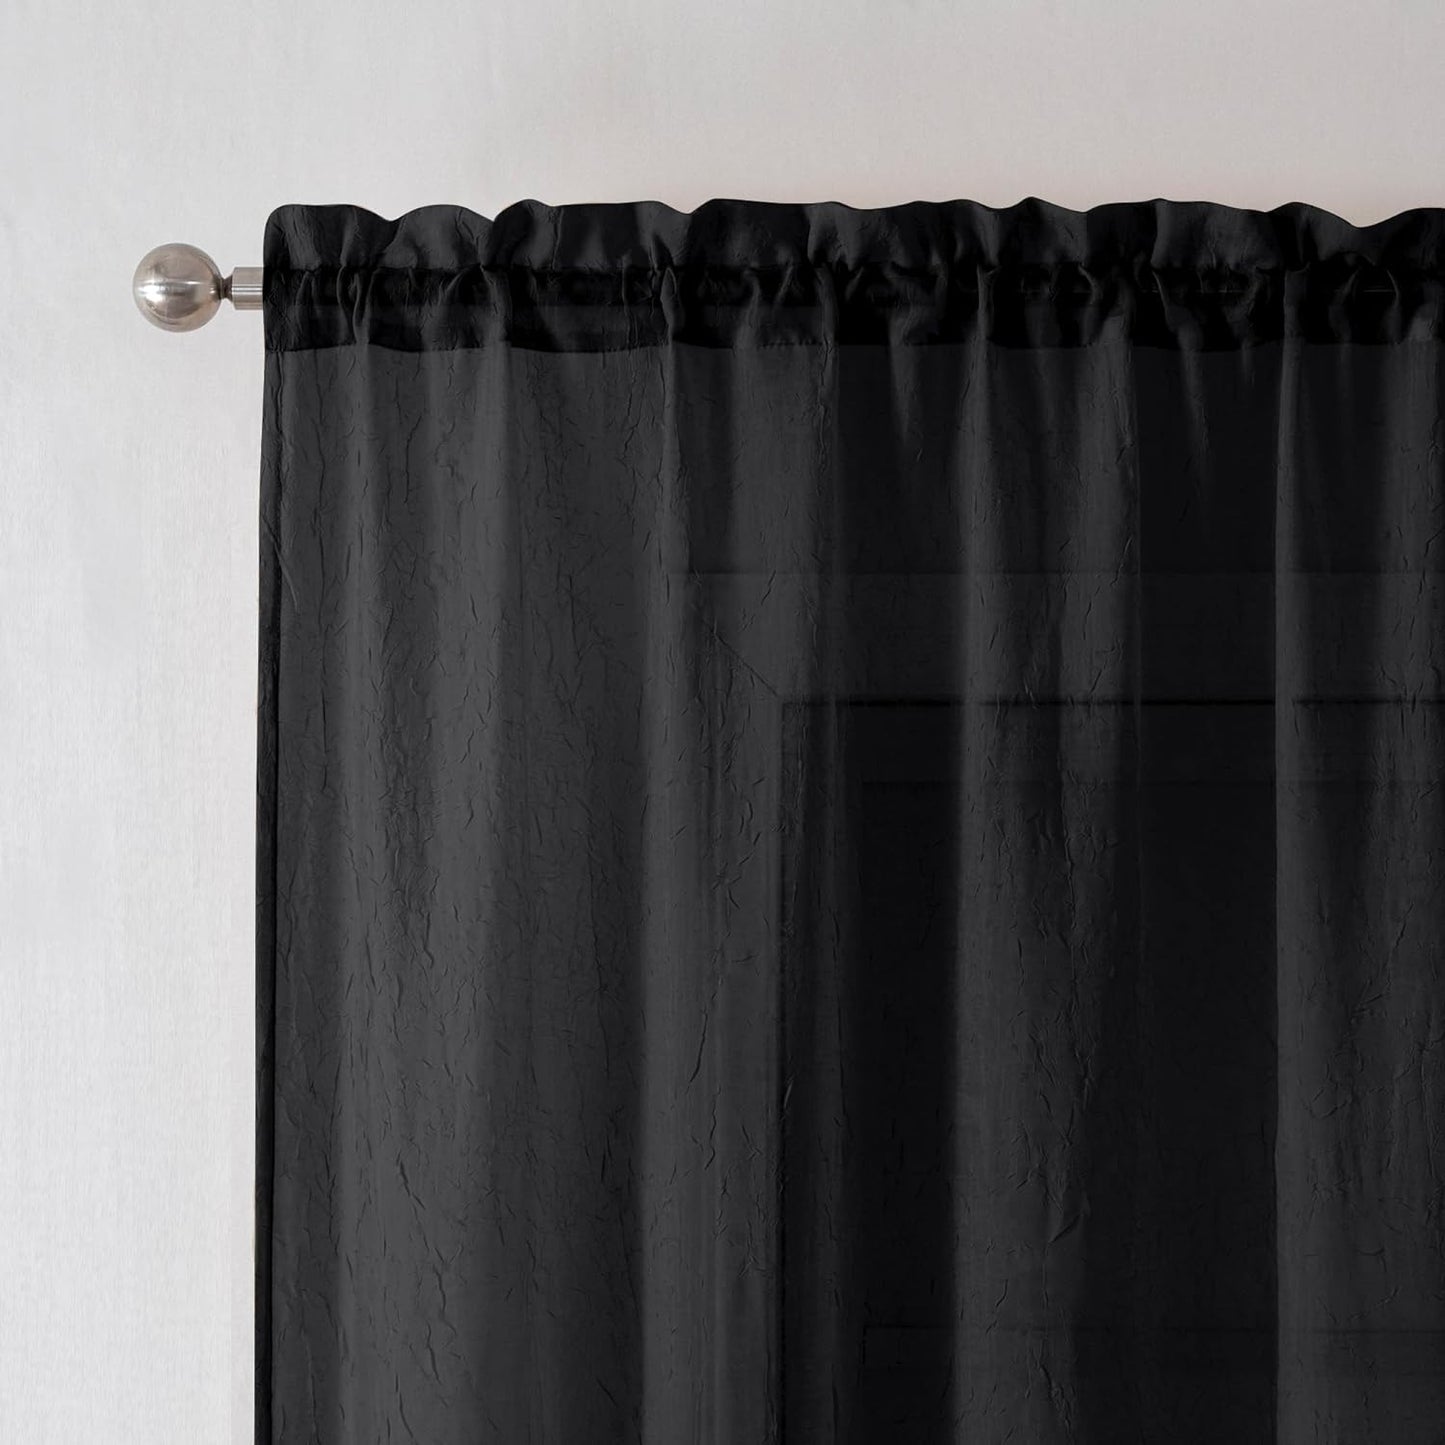 Chyhomenyc Crushed White Sheer Valances for Window 14 Inch Length 2 PCS, Crinkle Voile Short Kitchen Curtains with Dual Rod Pockets，Gauzy Bedroom Curtain Valance，Each 42Wx14L Inches  Chyhomenyc Black 42 W X 84 L 